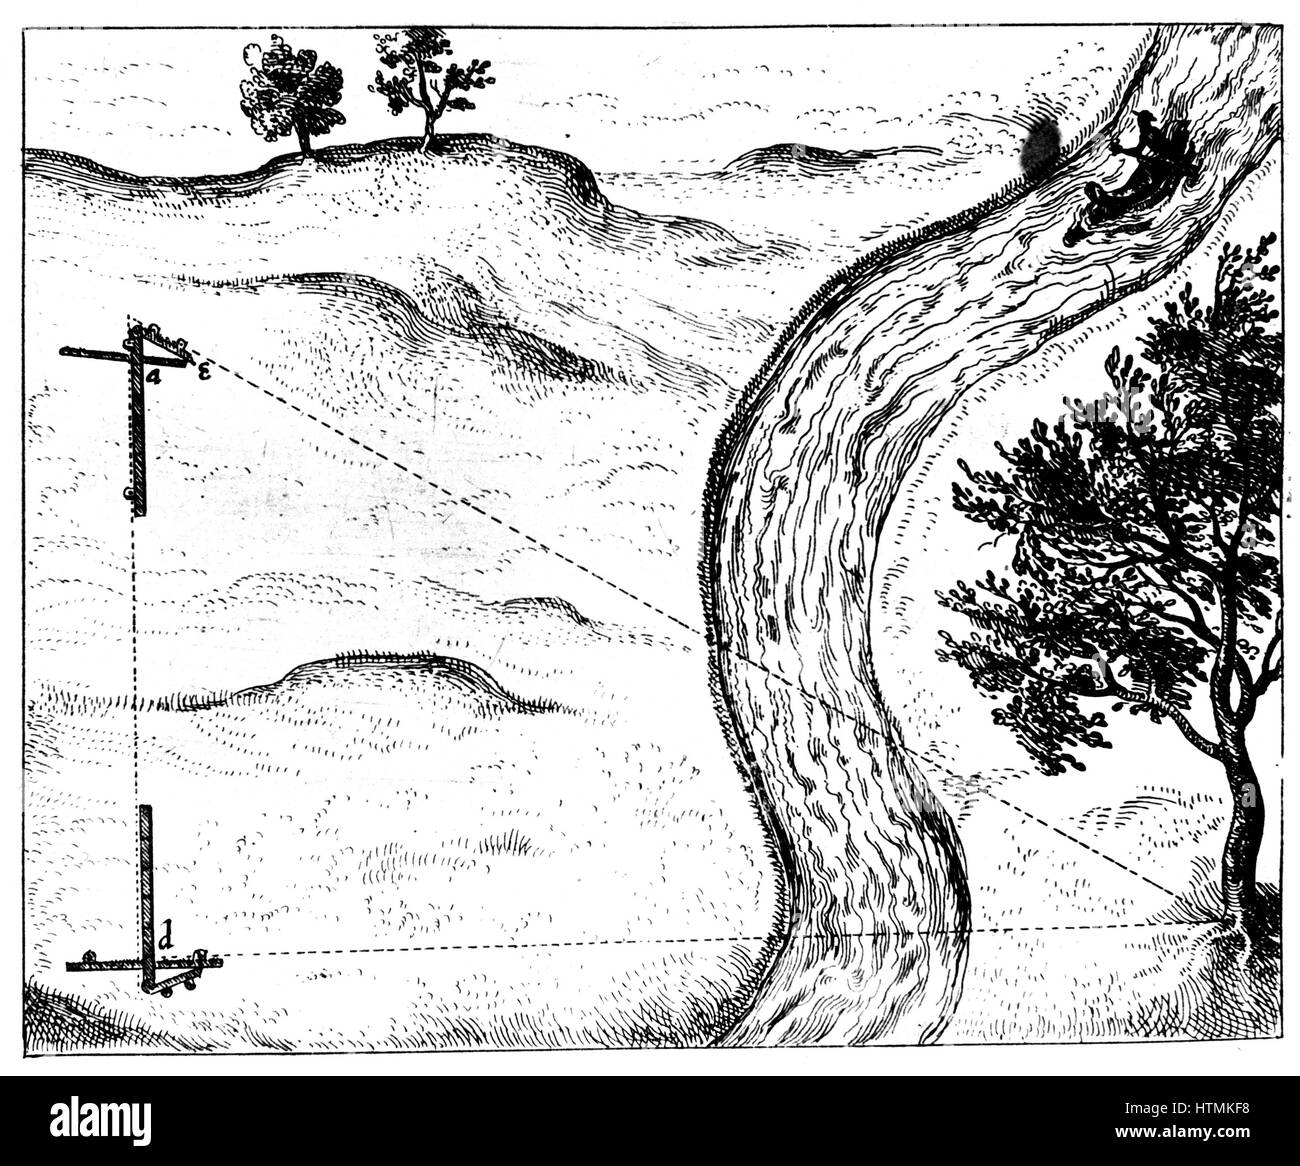 Measuring the distance of an inaccessible object by triangulation using a hinged staff. From Robert Fludd 'Utriusque cosmi … historia', Oppenheim, 1617-1619. Engraving Stock Photo